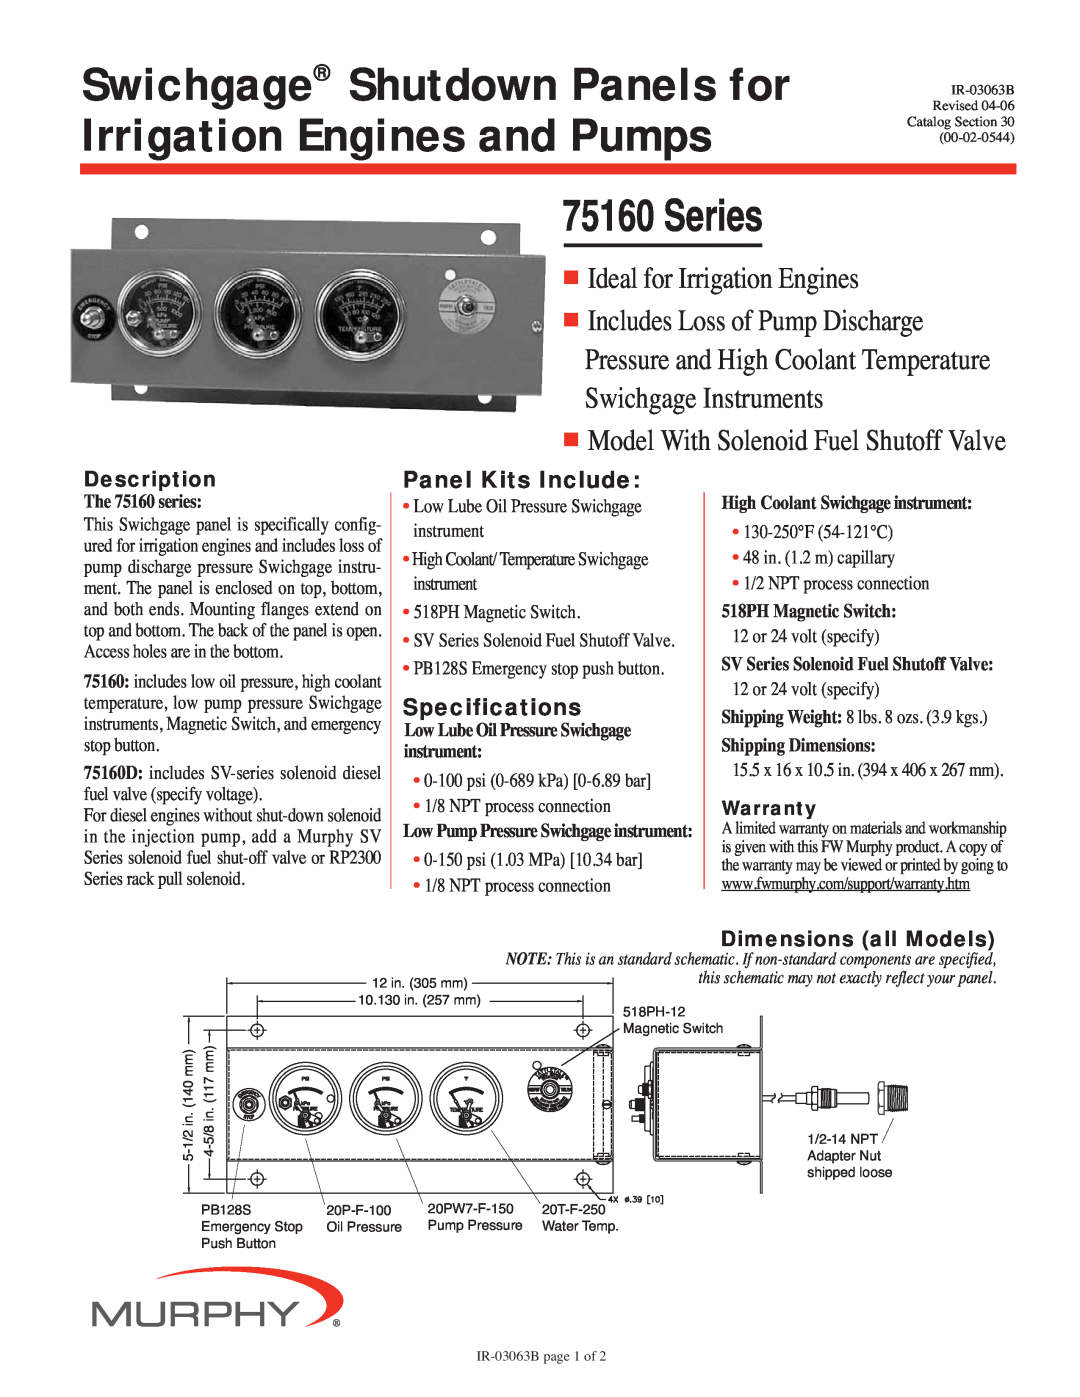 Murphy 75160 Series specifications Description, Dimensions all Models, Ideal for Irrigation Engines, Panel Kits Include 